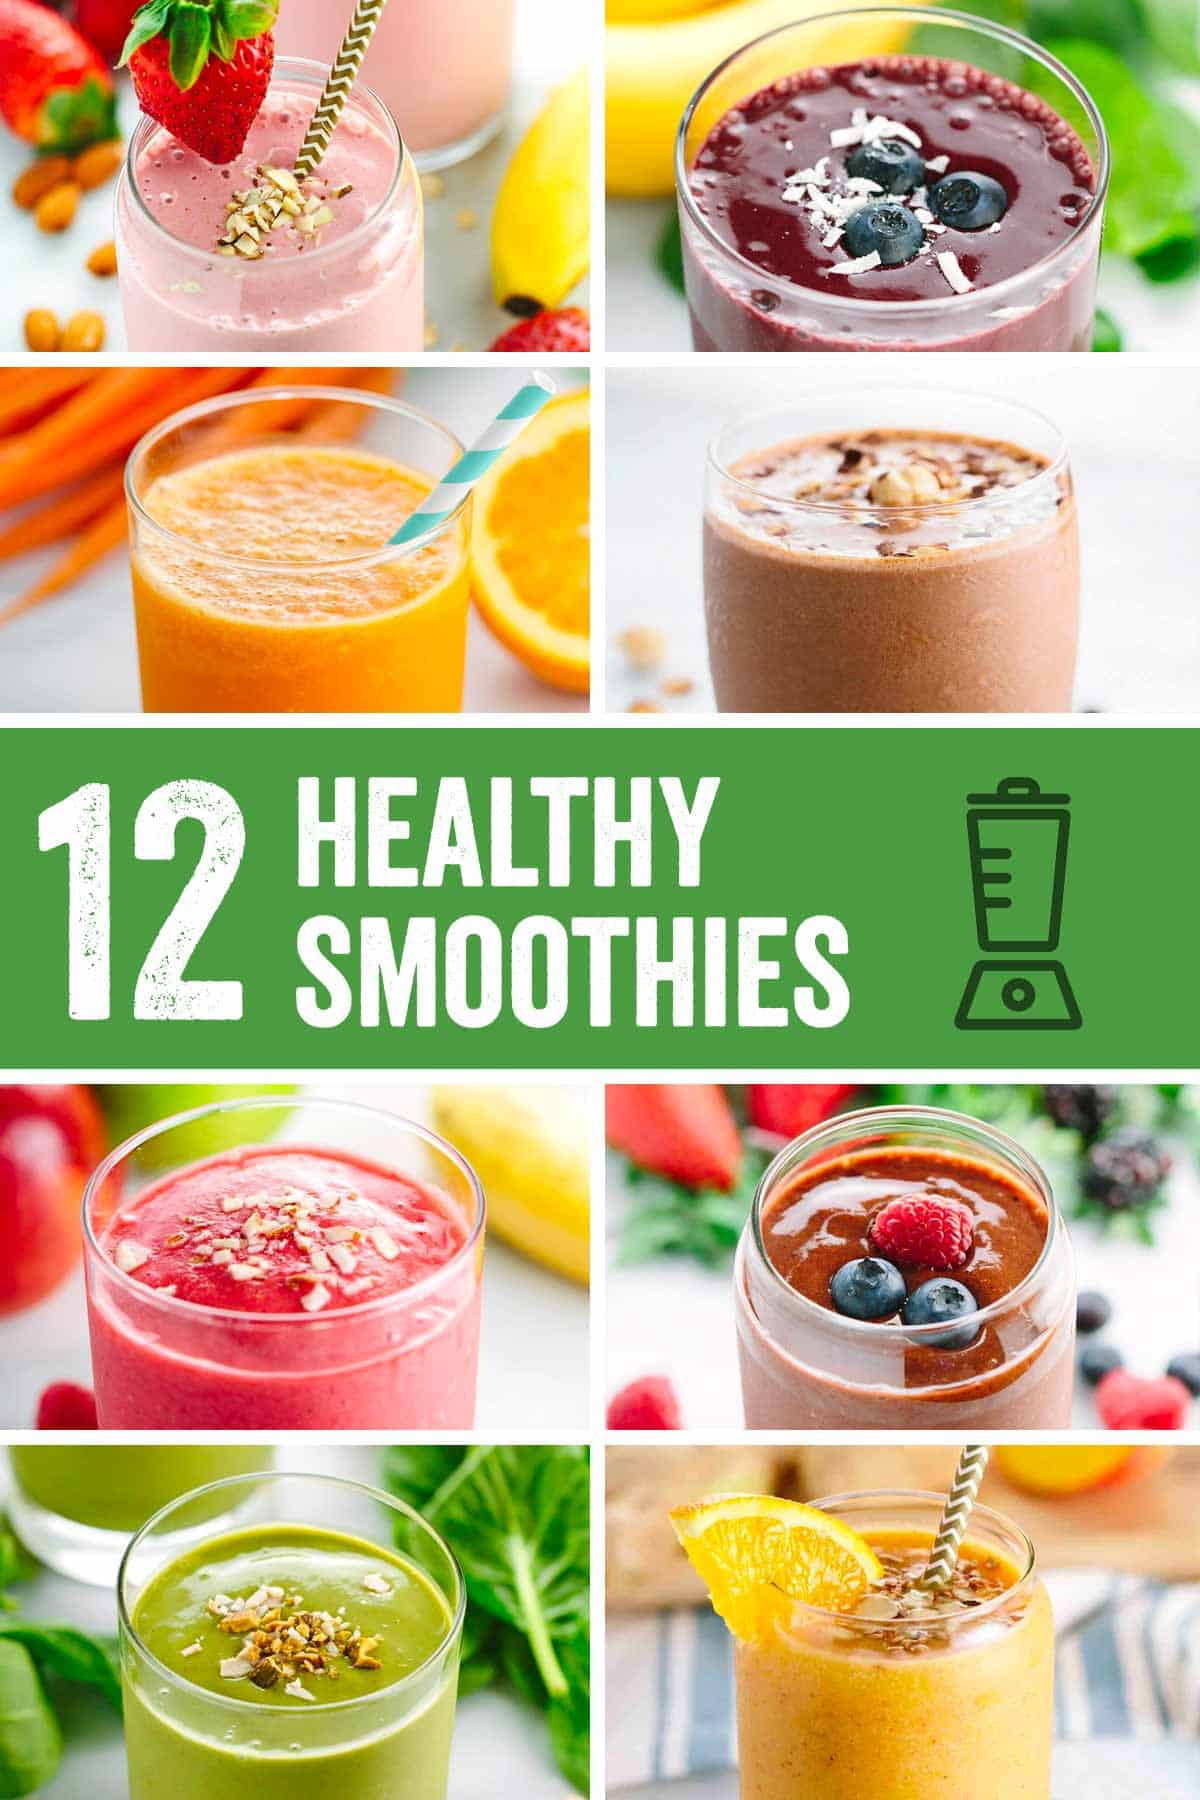 Easy Healthy Smoothie Recipes
 Roundup Easy Five Minute Healthy Smoothie Recipes